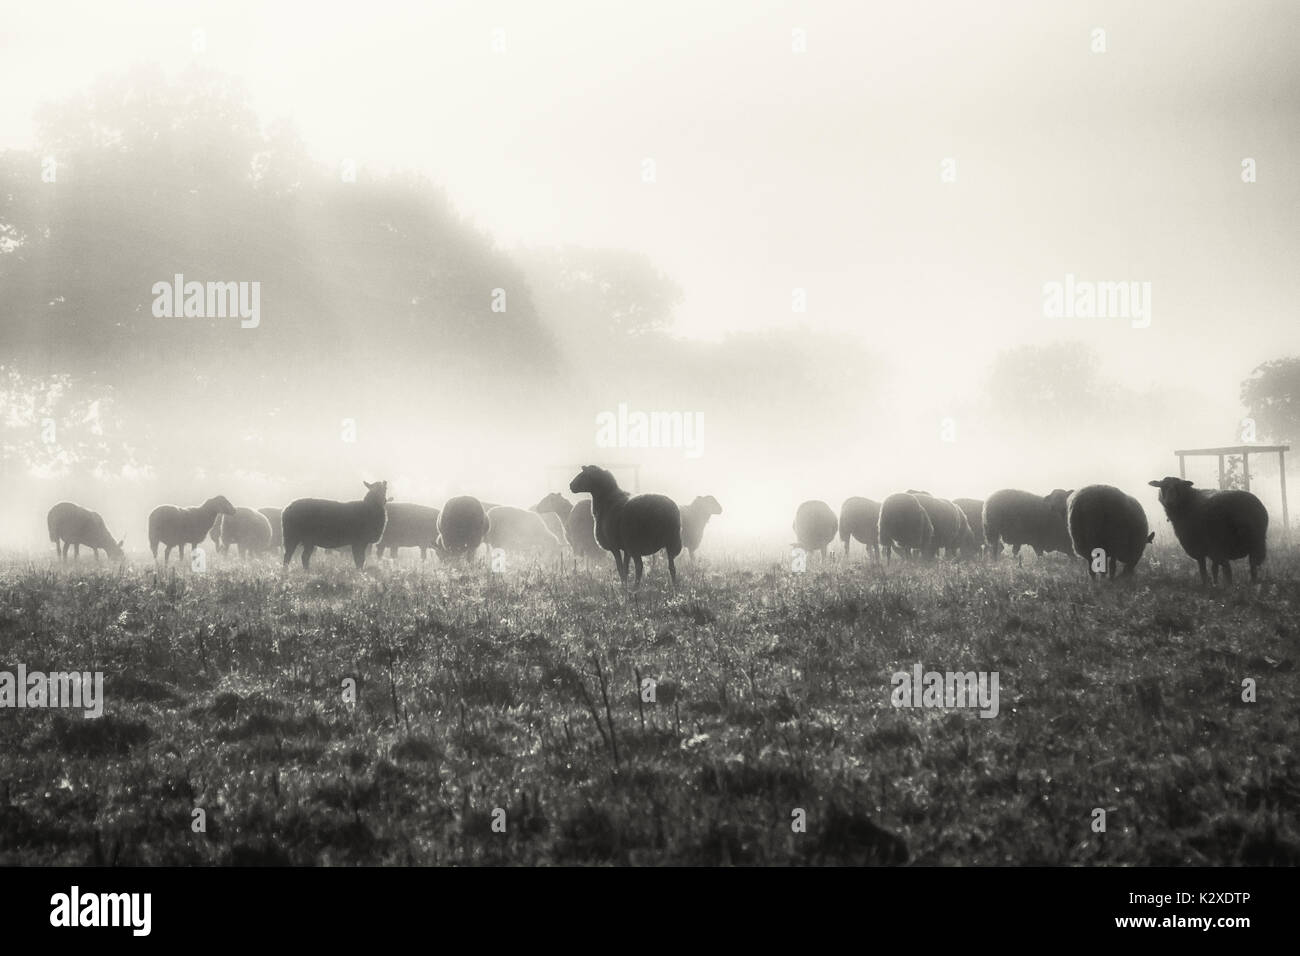 Very early on an autumn morning and the flock of sheep find their way through the morning mist Stock Photo